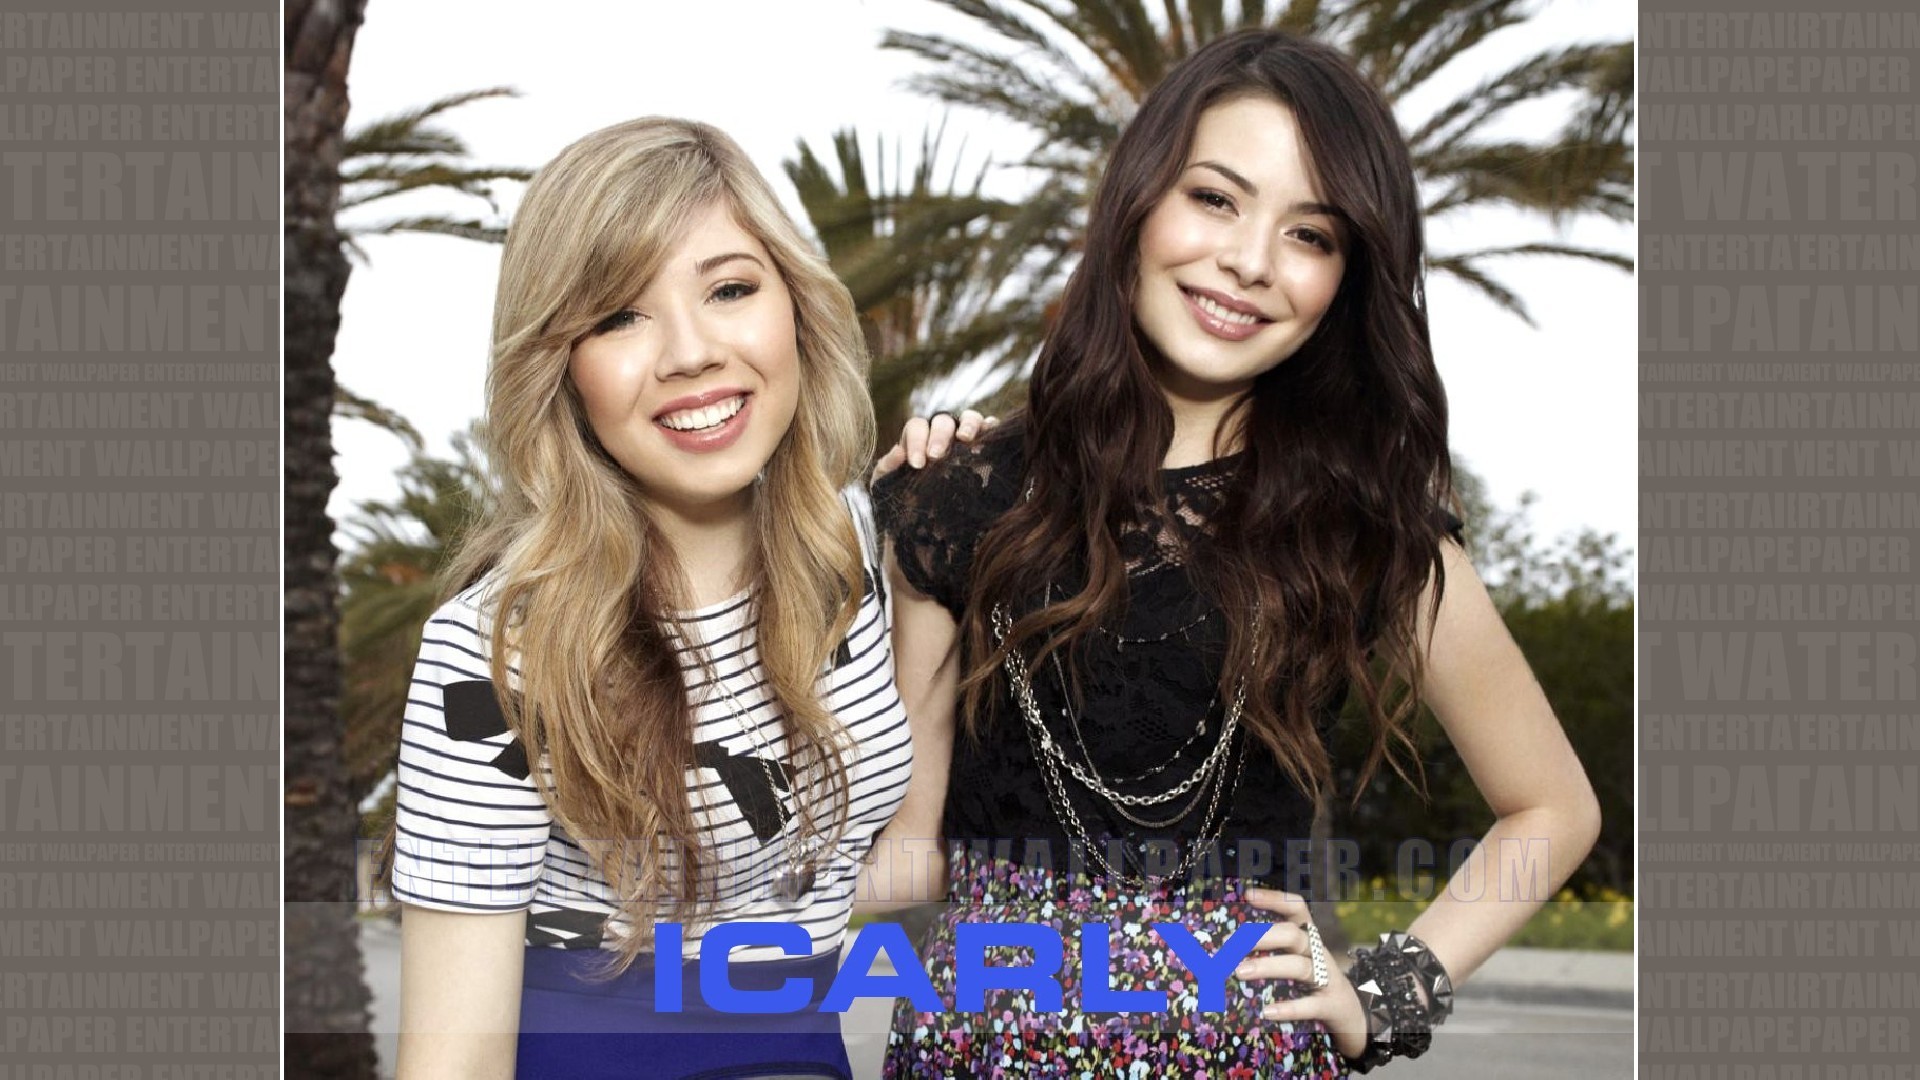 1920x1080 iCarly Wallpaper - Original size, download now.